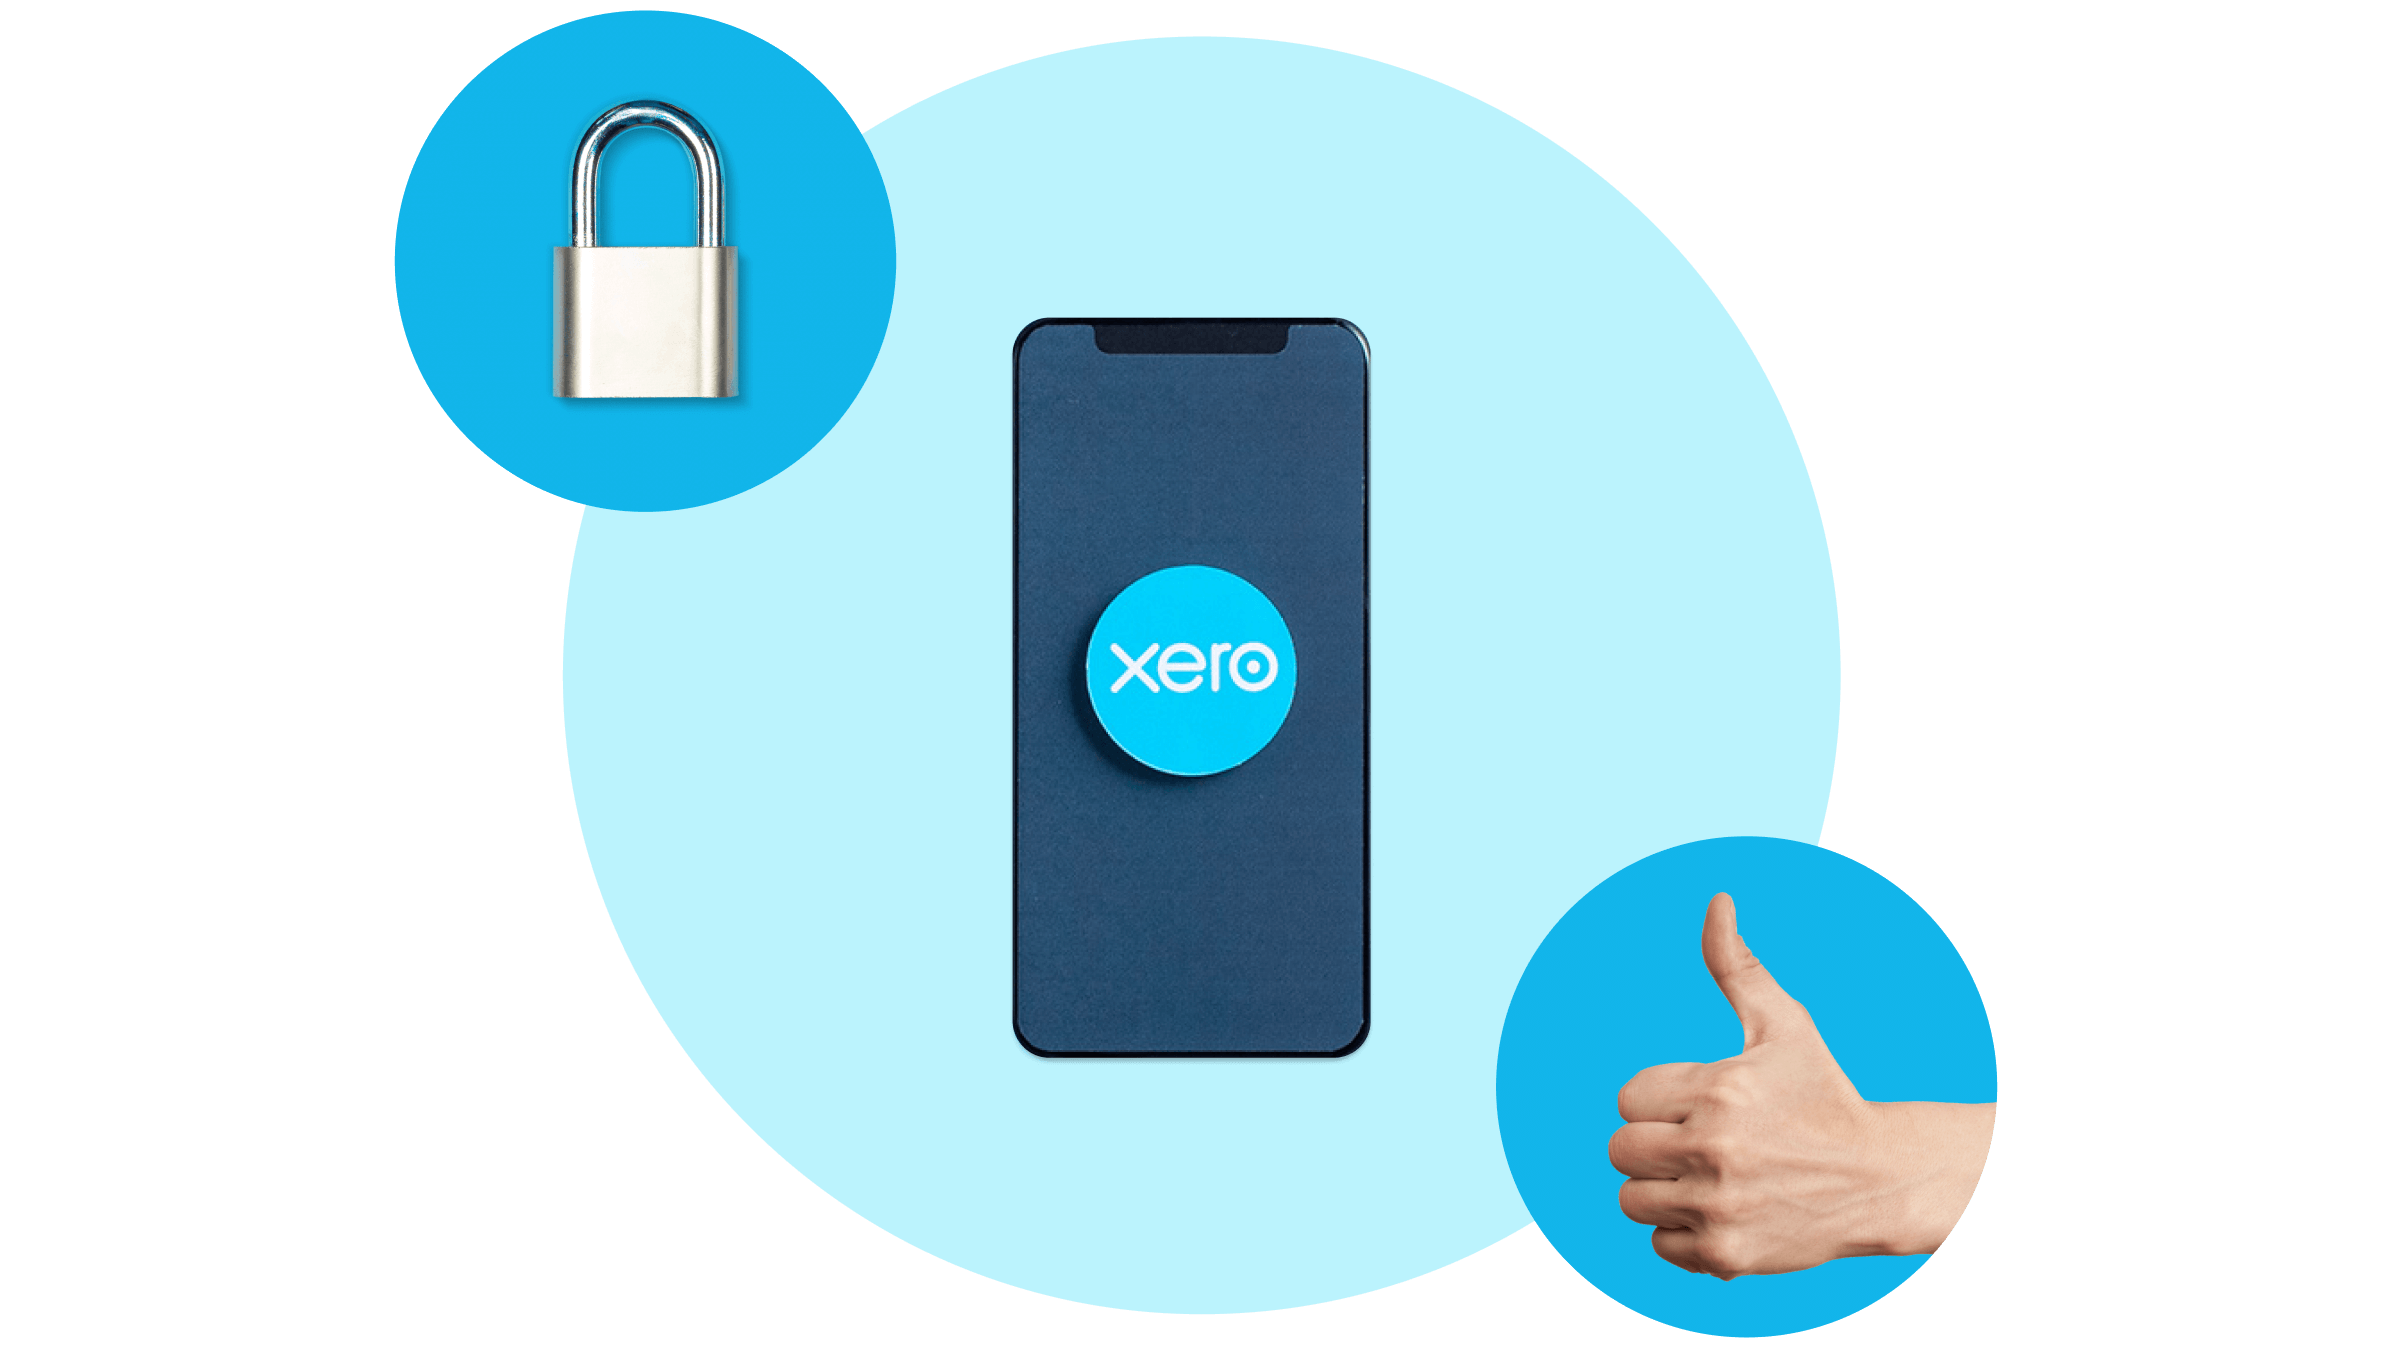 A padlock, a mobile phone with the Xero logo on it, and a thumbs-up sign represent Xero’s commitment to responsible data use.